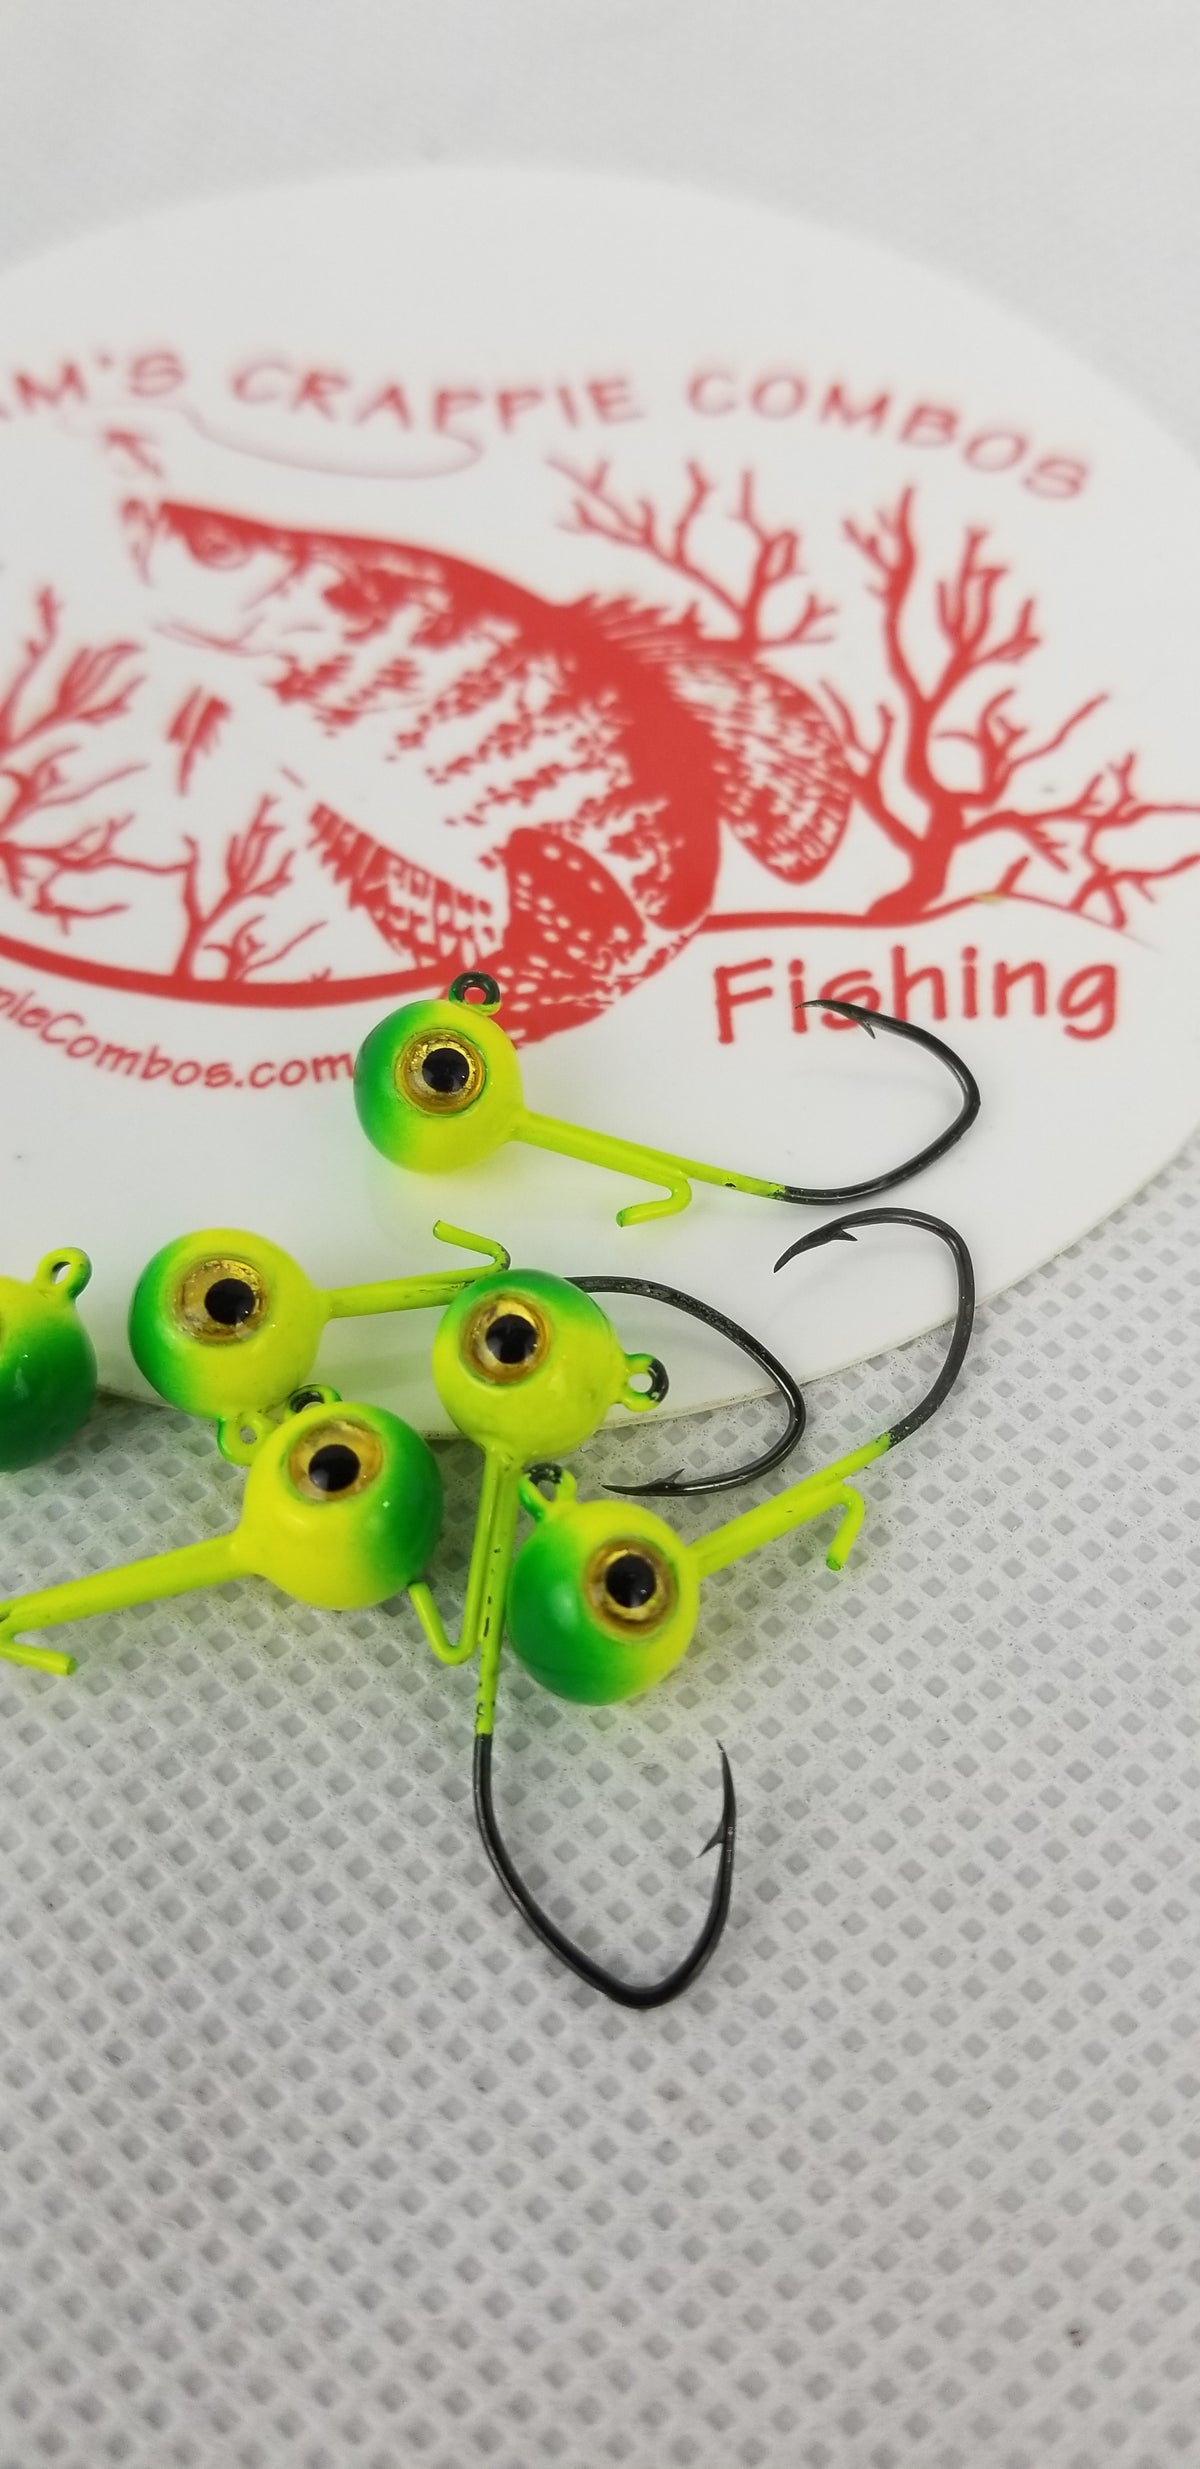 Cam's 20ct. Premium Honey Chartreuse (1/16 #4 Nasty Bend Hook) Holographic Life Like Double Paint Jig Head